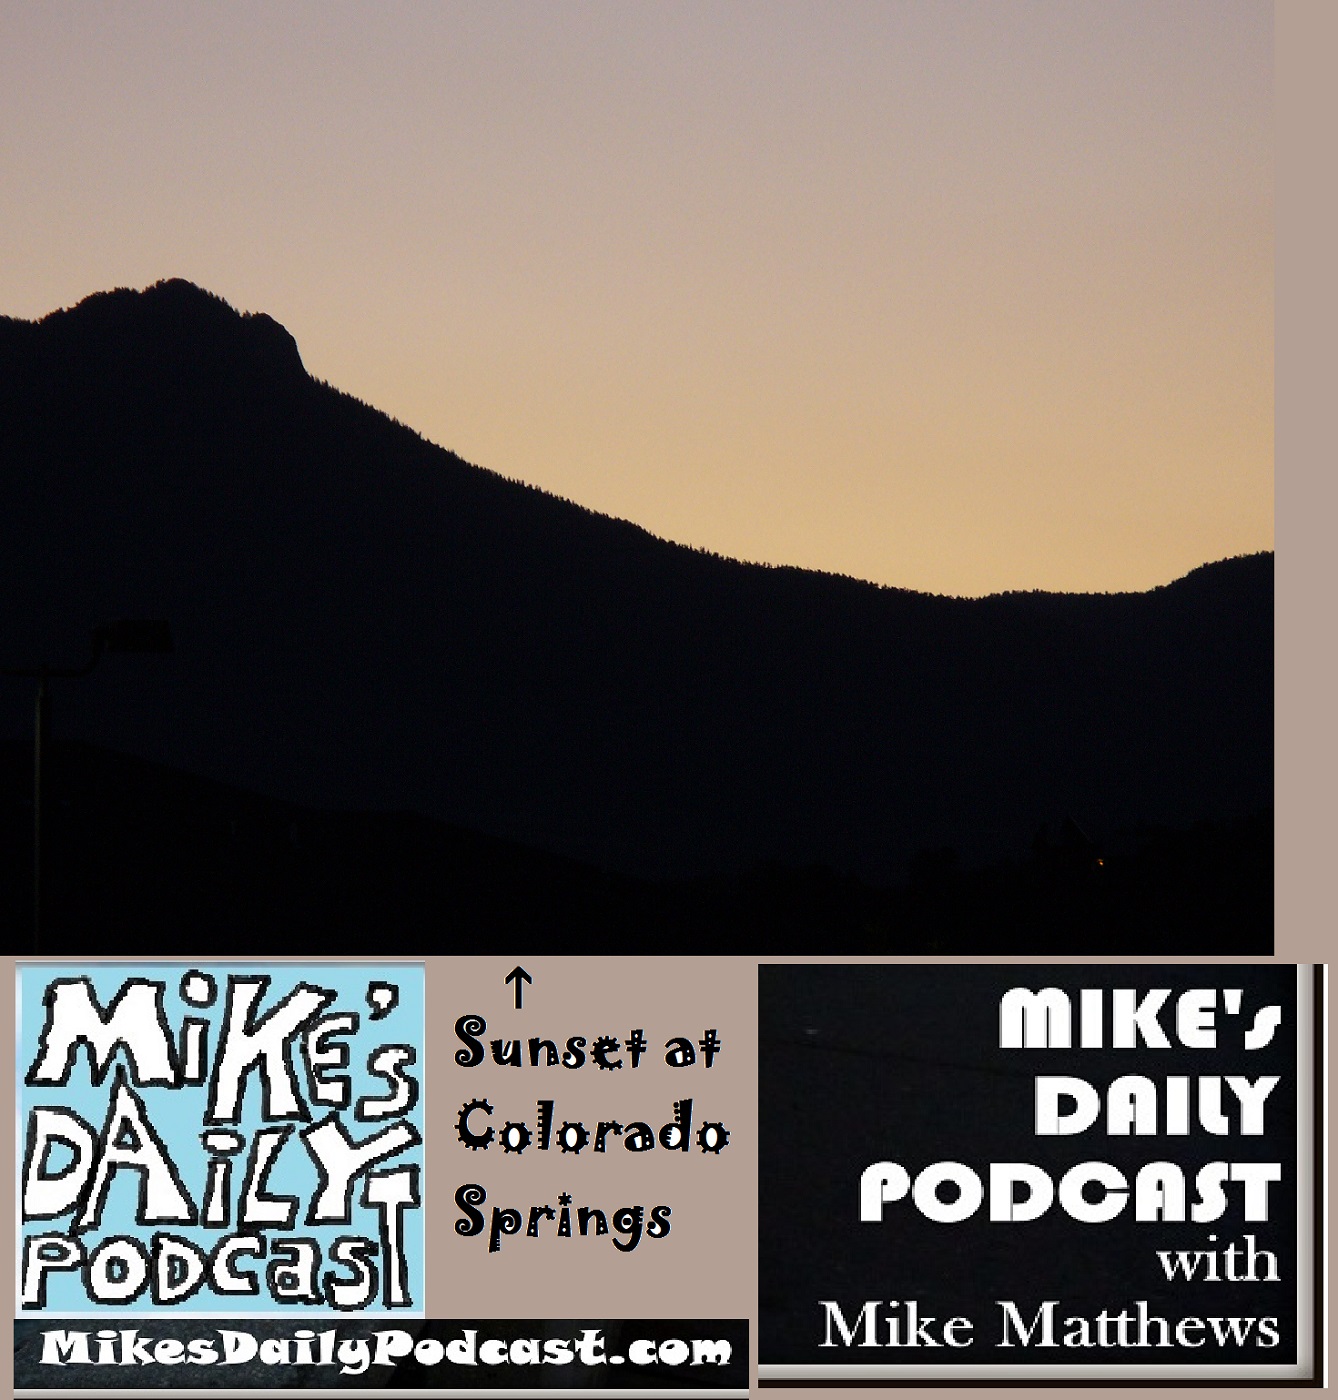 MIKEs DAILY PODCAST 1126 Colorado Springs sunset